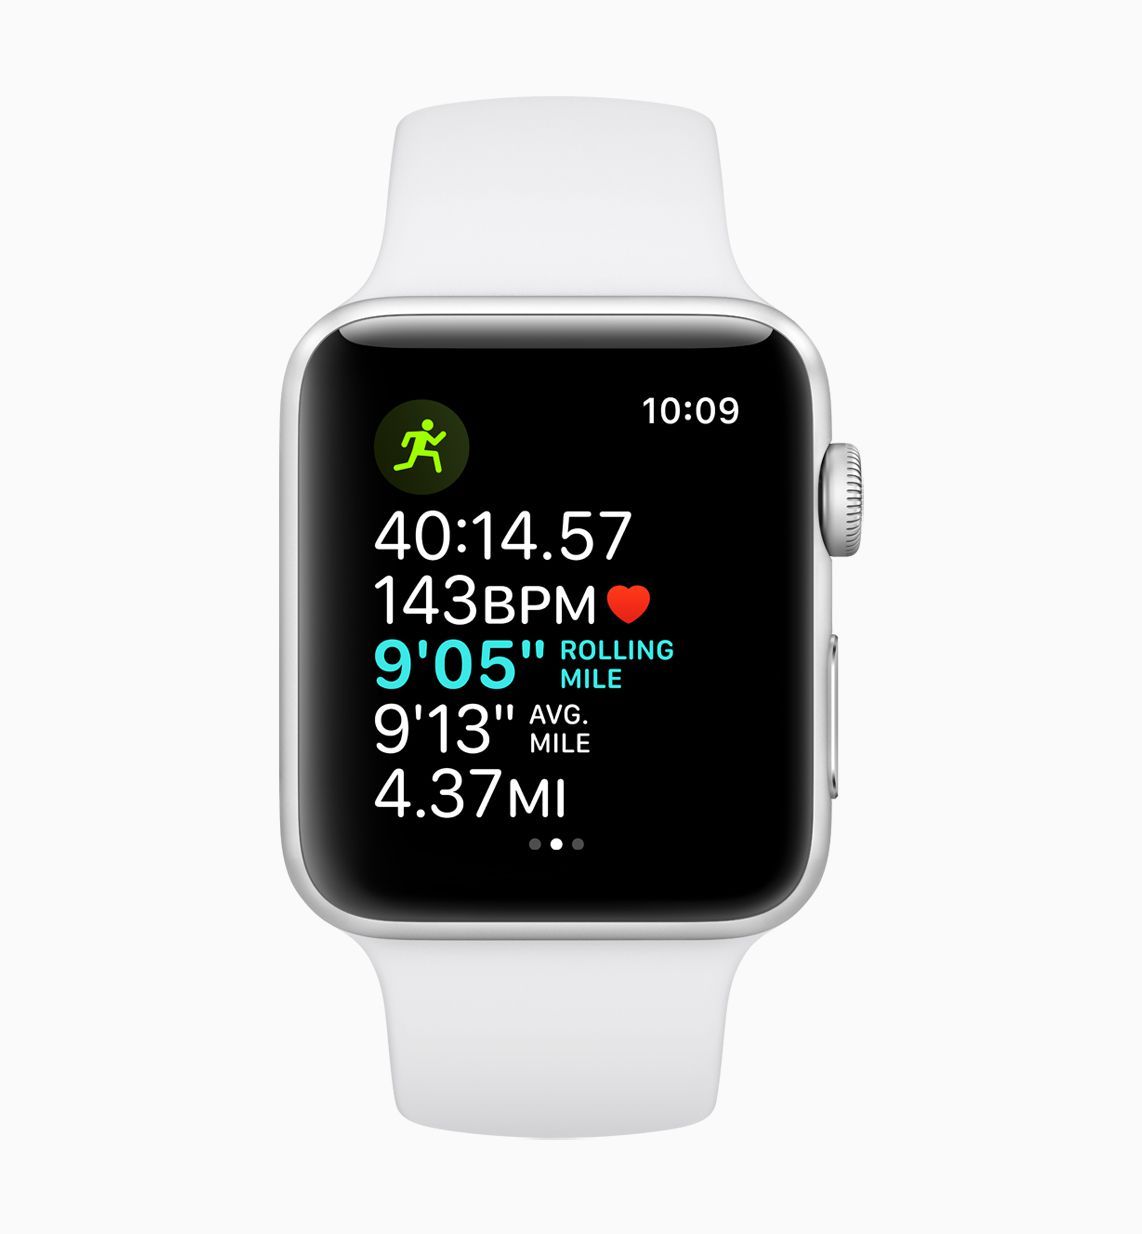 New Apple Watch Features For Runners